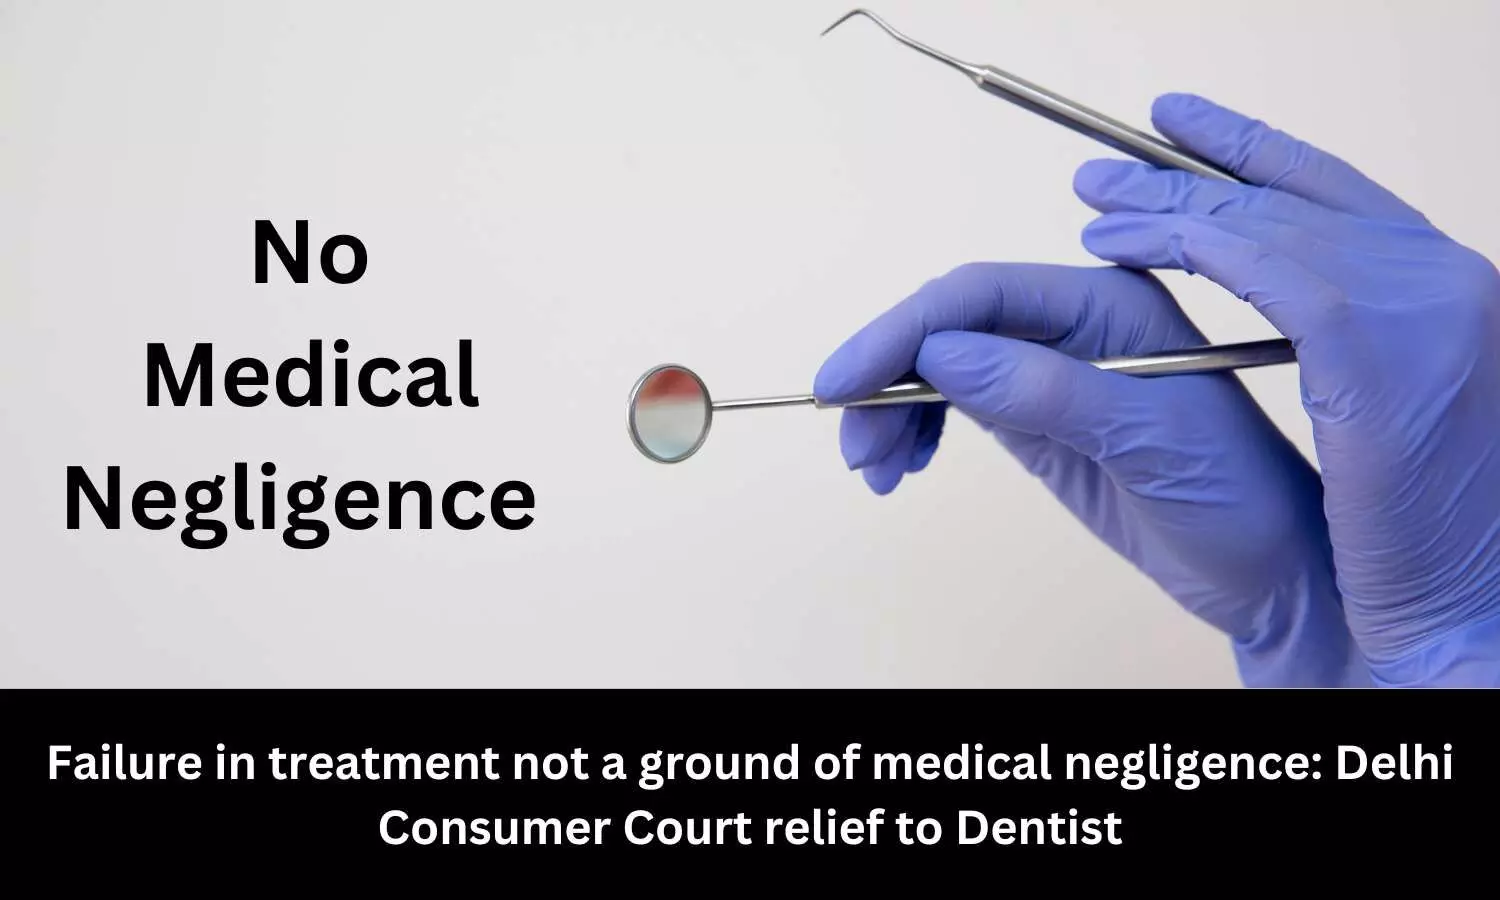 Failure in treatment not a ground of medical negligence: Delhi Consumer Court relief to Dentist